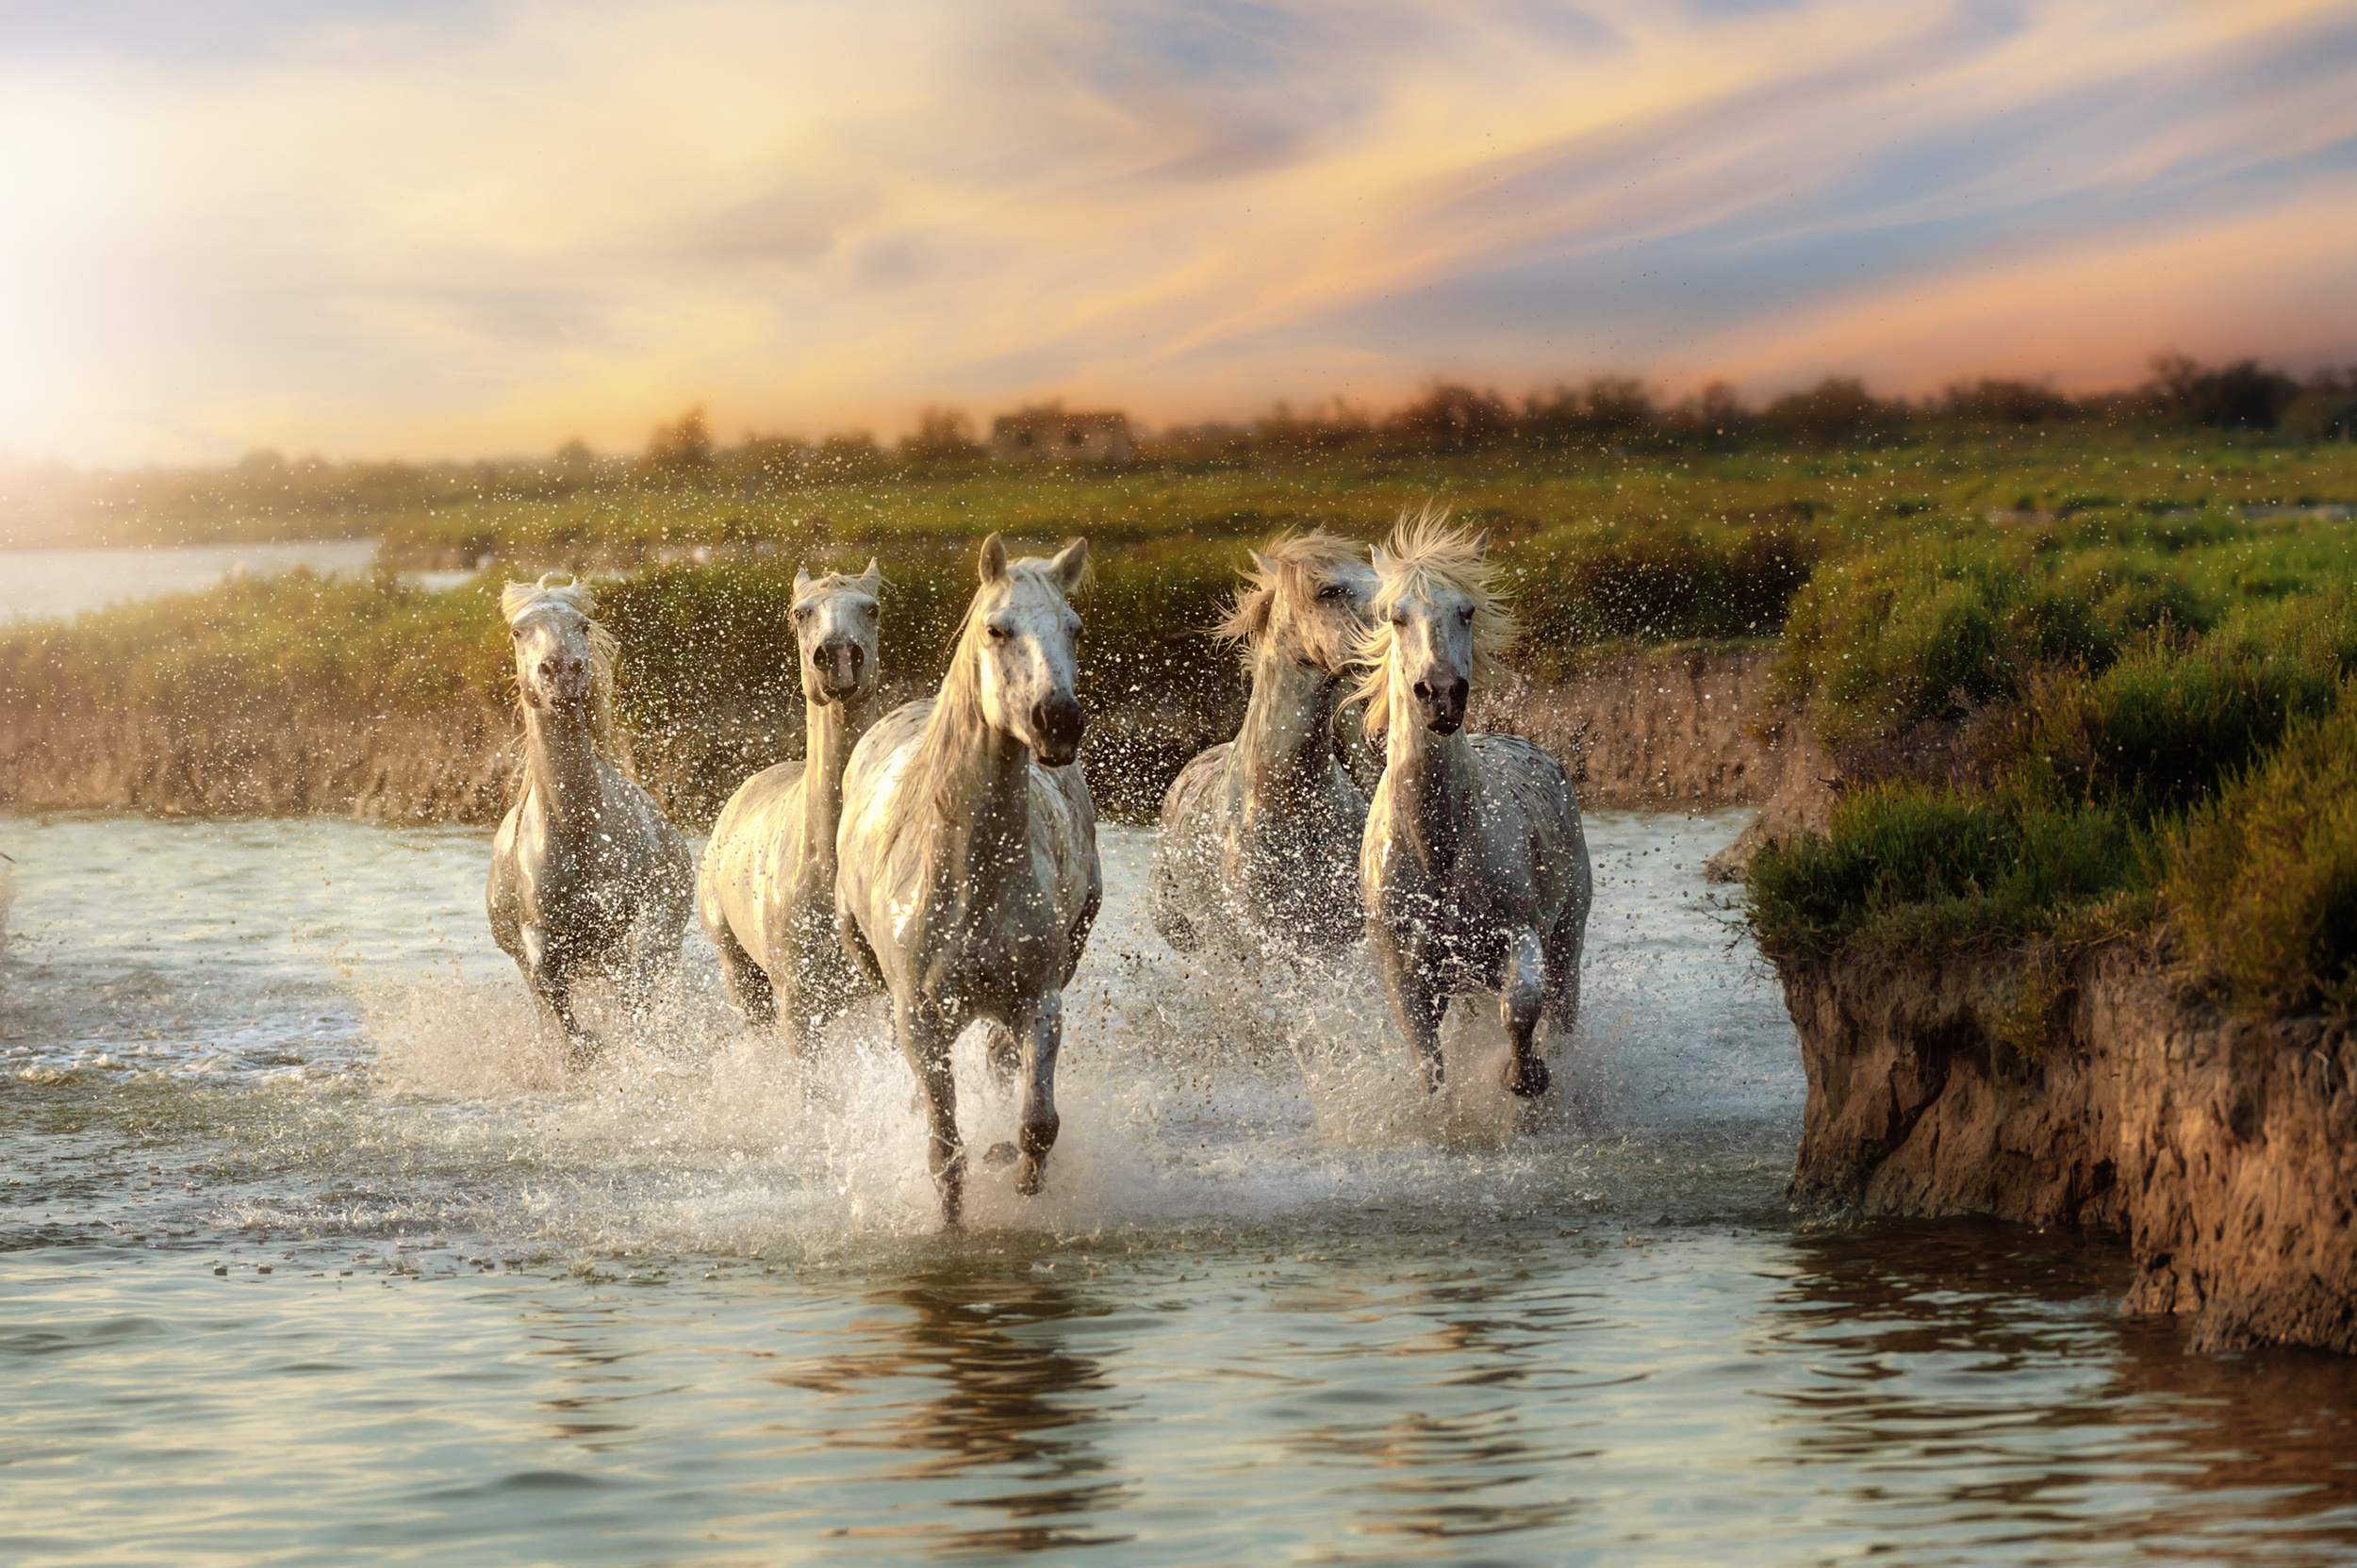 <p>Home to the breed of the same name, this area in the south of France is a beautiful coastal destination. And one that you can enjoy from the back of a true local — a Camargue horse!</p><p><a href='https://www.msn.com/en-us/community/channel/vid-cj9pqbr0vn9in2b6ddcd8sfgpfq6x6utp44fssrv6mc2gtybw0us'>Follow us on MSN to see more of our exclusive lifestyle content.</a></p>